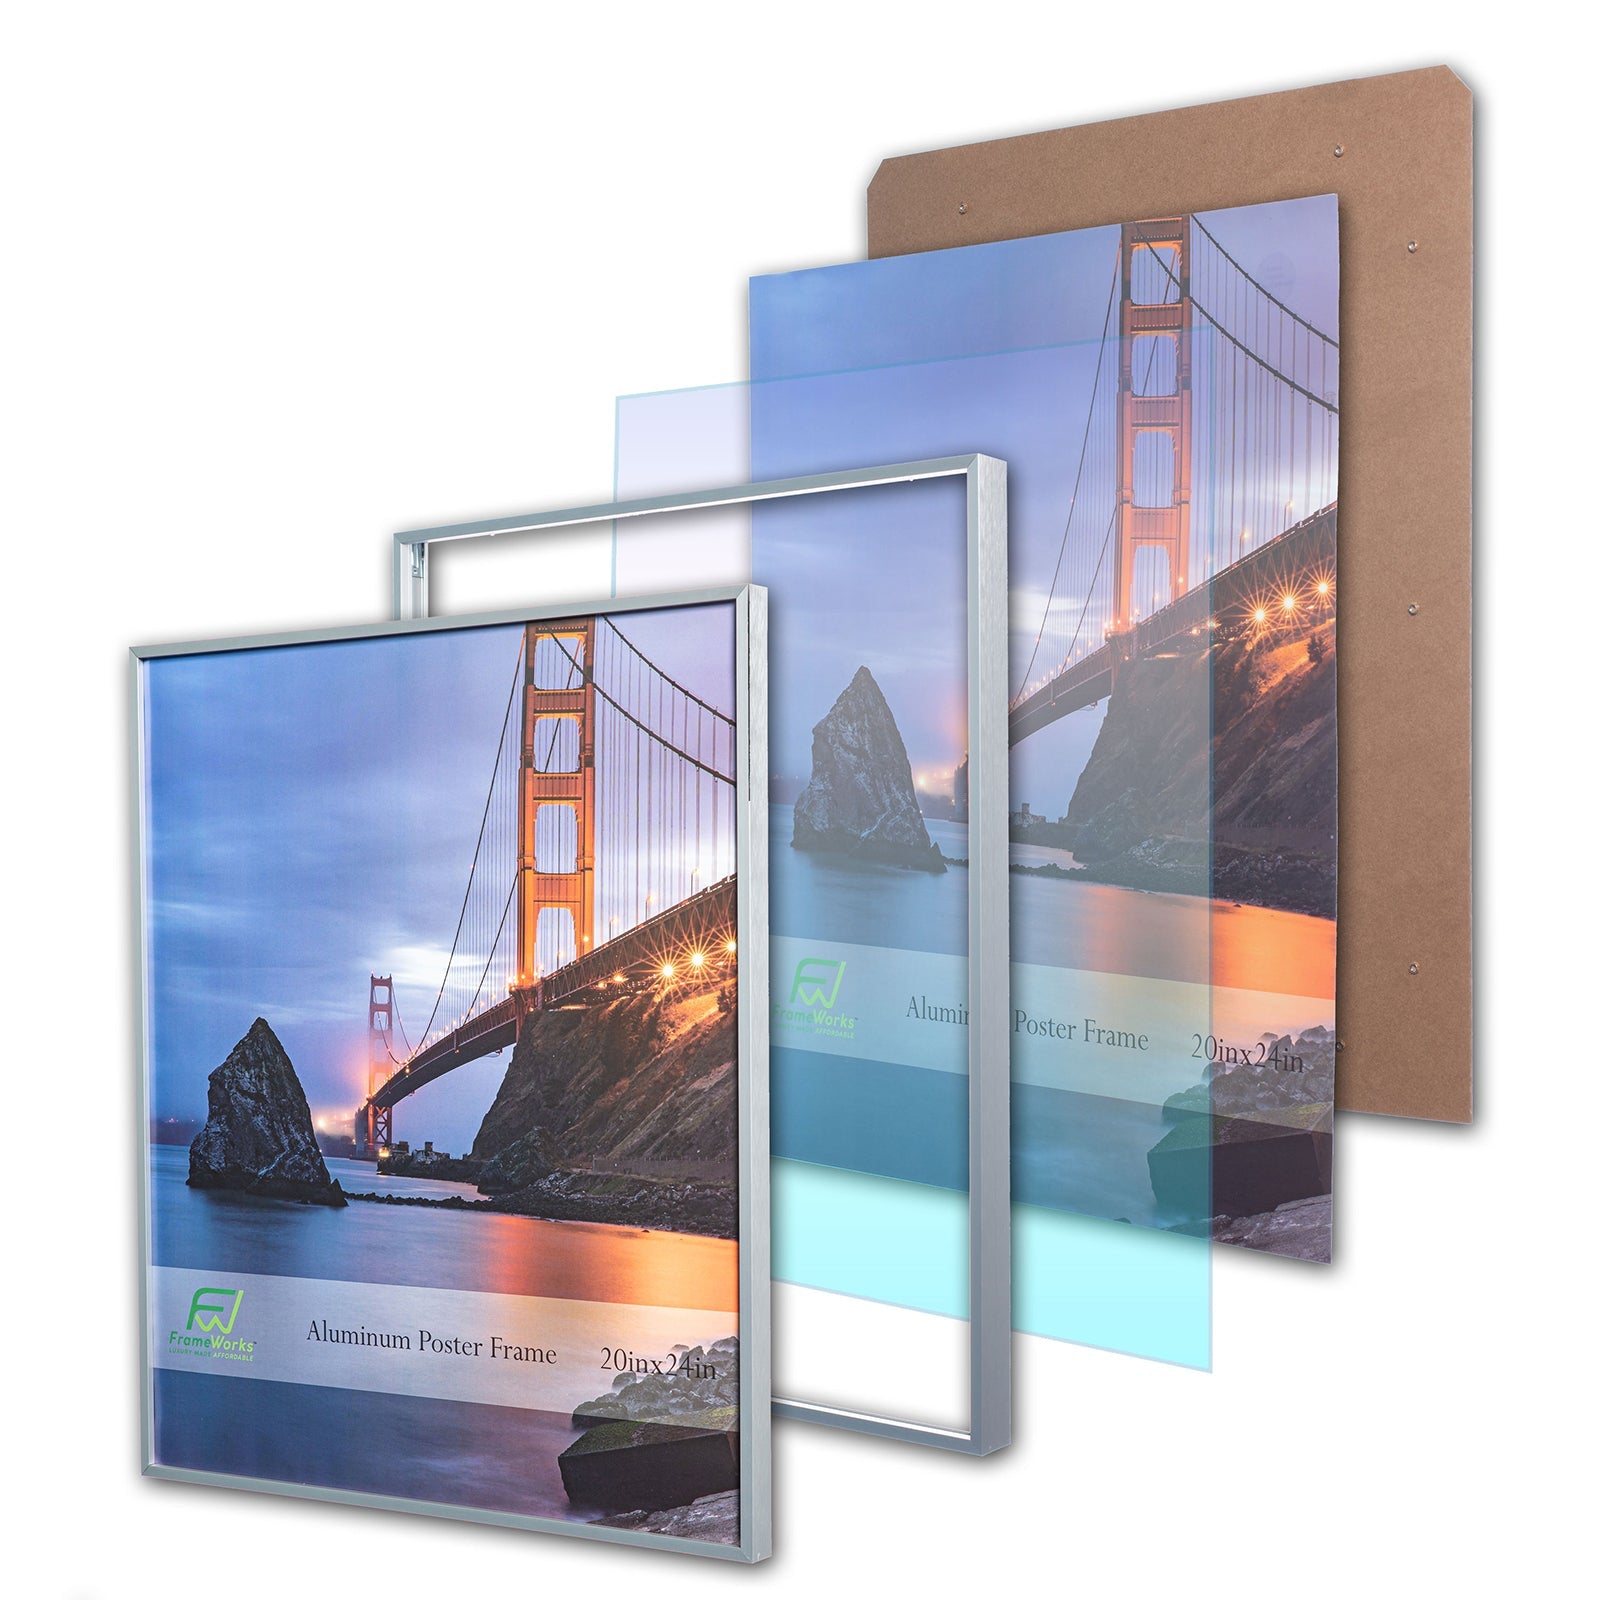 20" x 24" Silver Brushed Aluminum Poster Picture Frame with Plexiglass